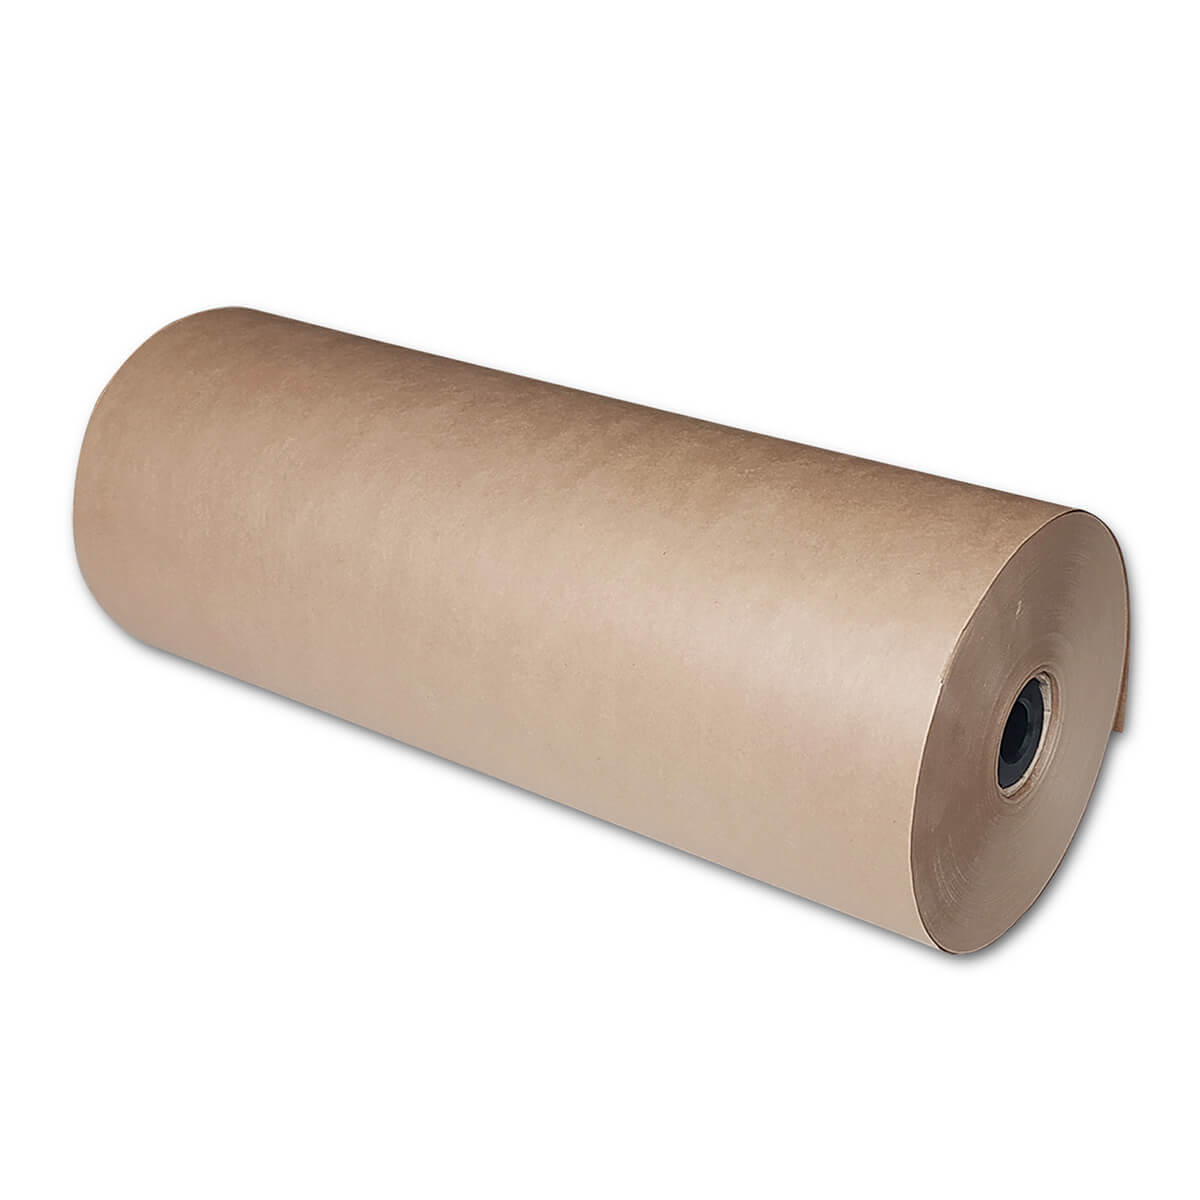 Kraft paper 70 g|m² wrapping paper 50 cm x 300 m on roll